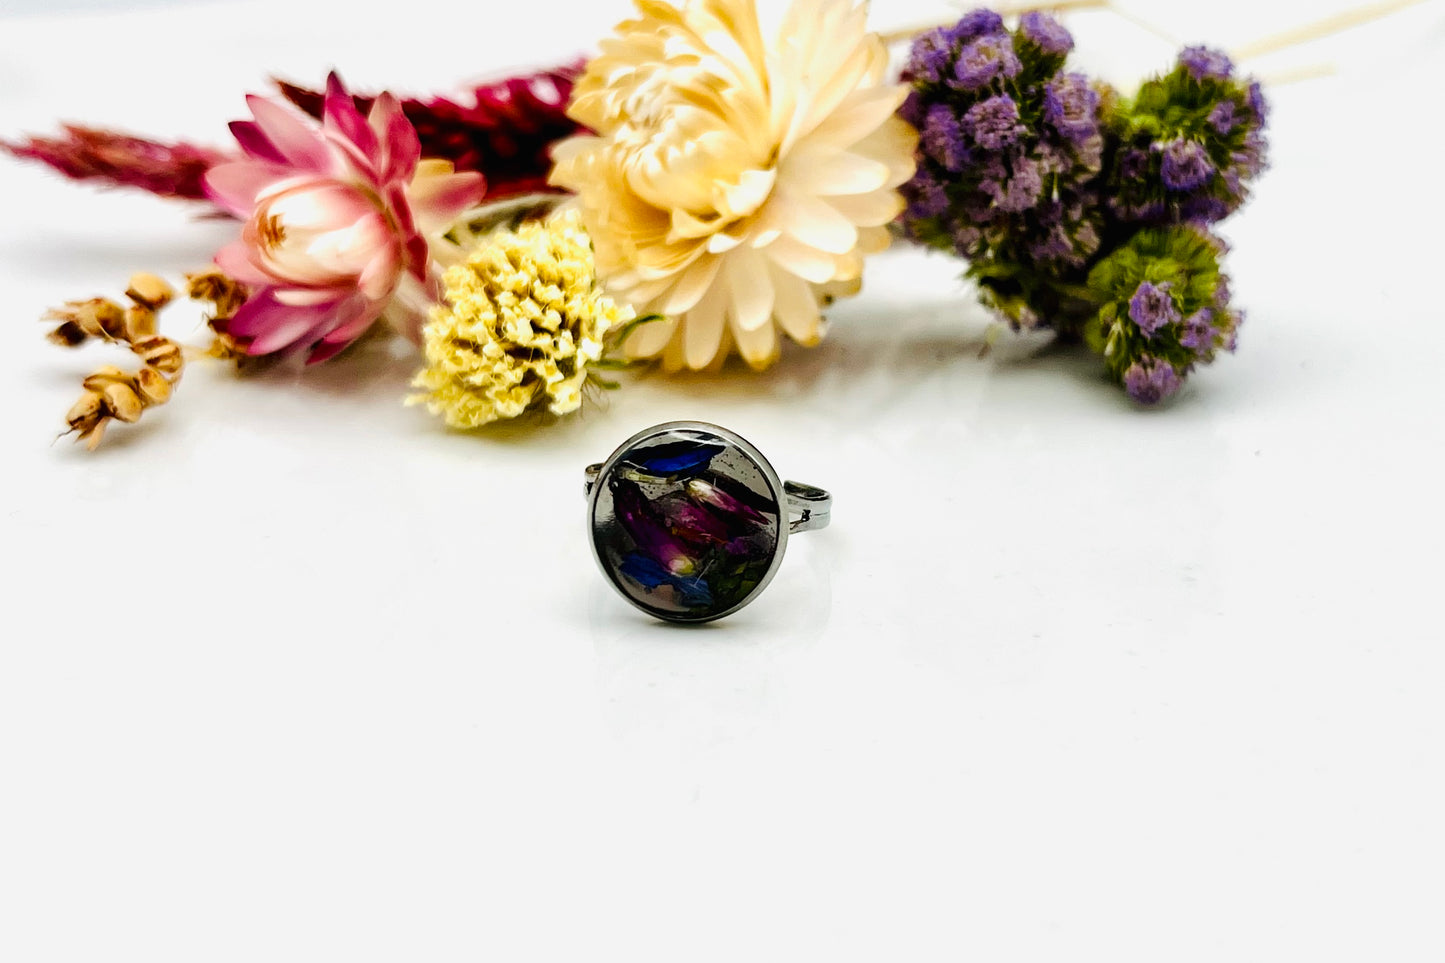 Dried Flower Aster Charcoal Ring